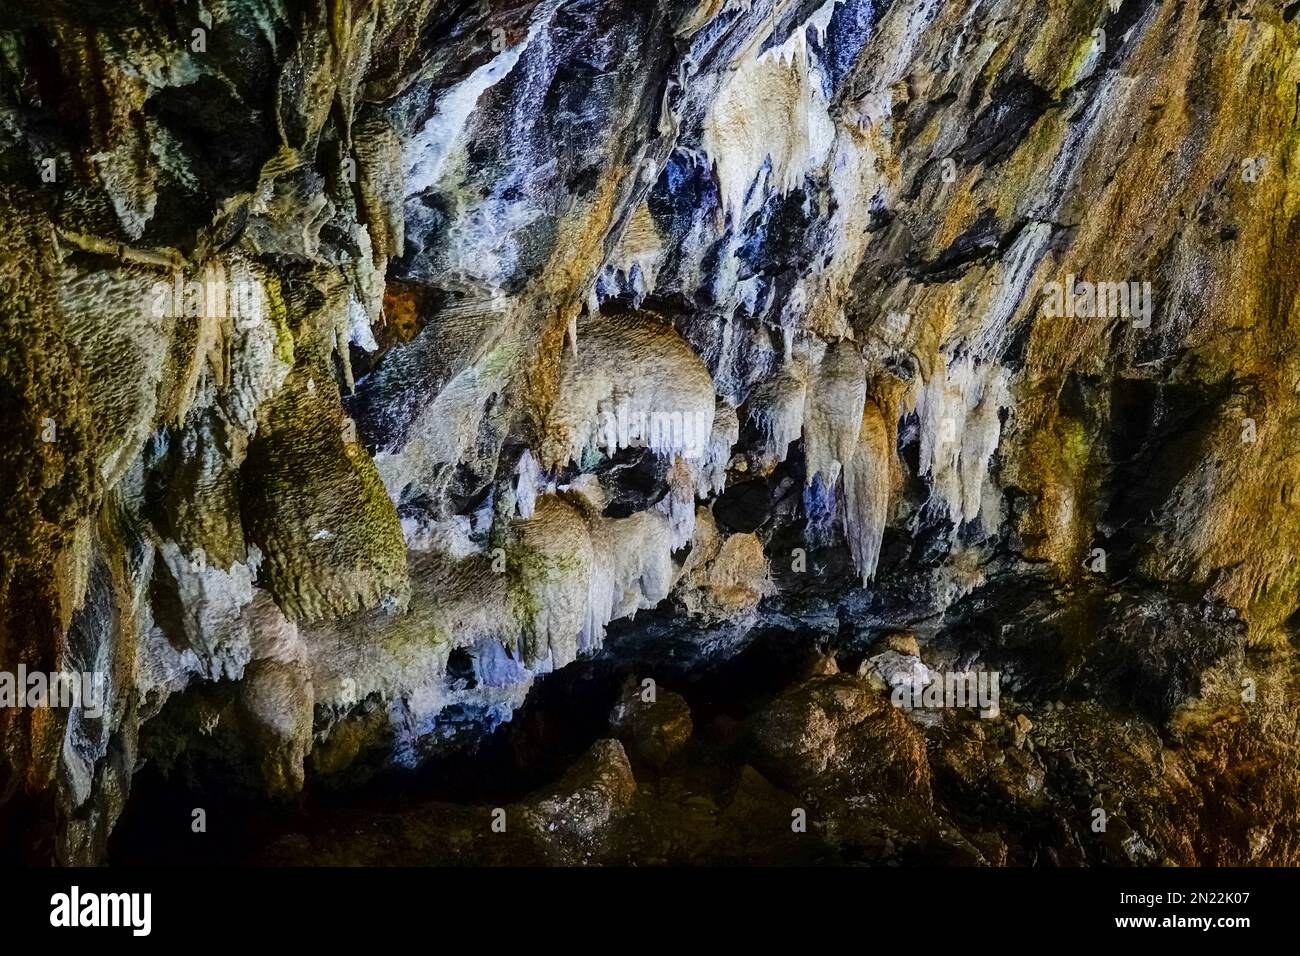 Silicate stalactites inside the Algar do Carvão a vertical lava tube dropping 300 feet from the surface accessible by a narrow staircase to a clear water pool at the bottom in the central mountains, Terceira Island, Azores, Portugal. Stock Photo